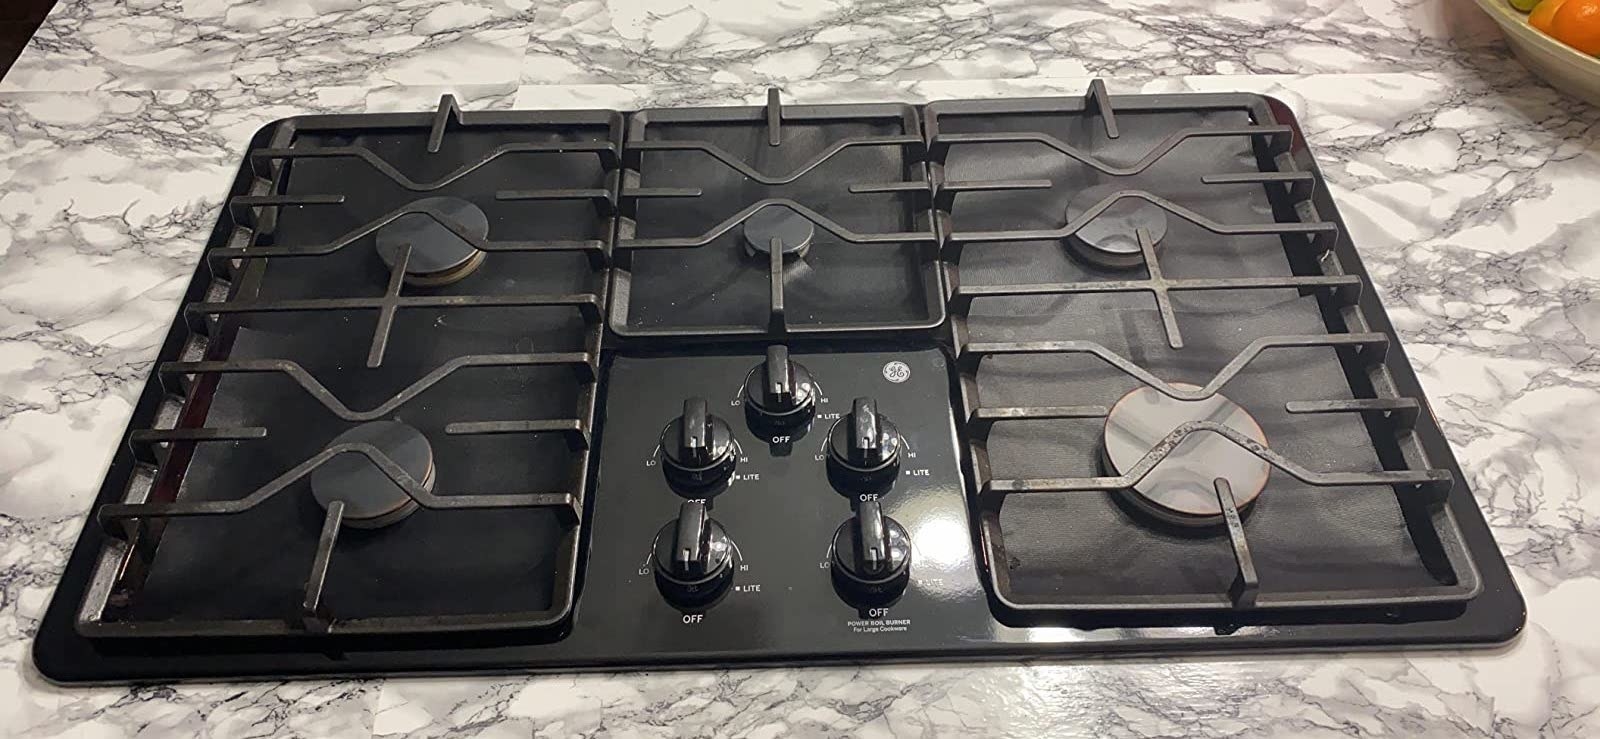 reviewer&#x27;s stove with the black covers around the burners